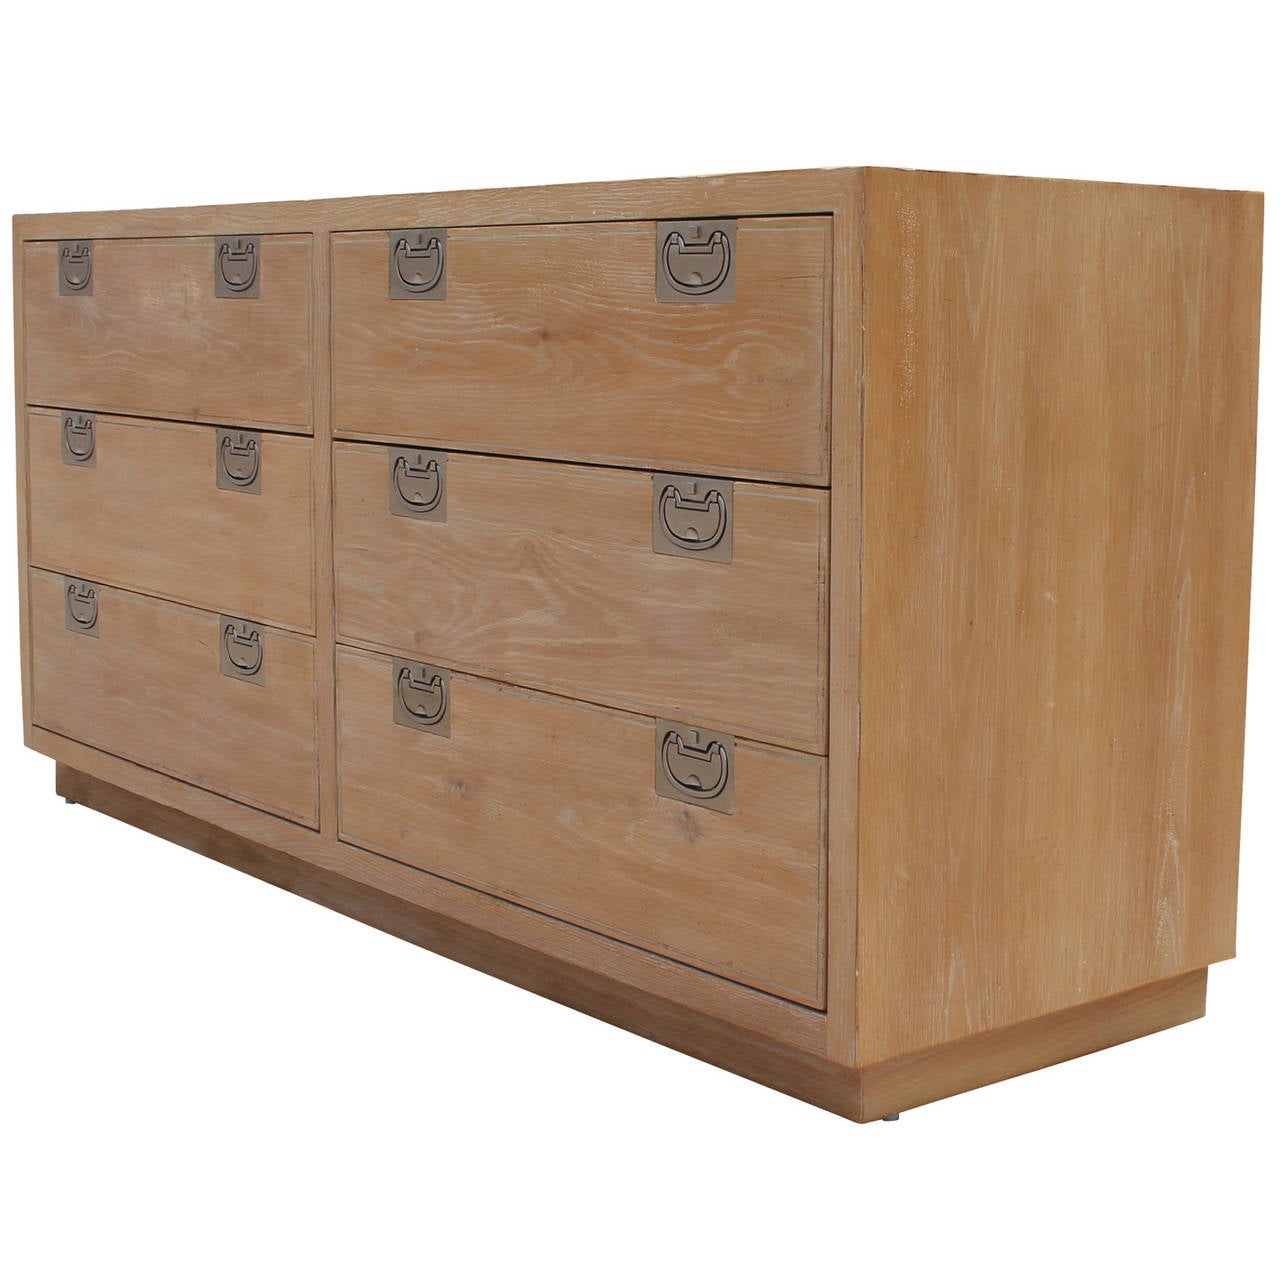 Fabulous blonde wood campaign style dresser by Henredon. Dresser has 6 drawers-top right drawer is slotted. Piece is accented with soft brass campaign style pulls.